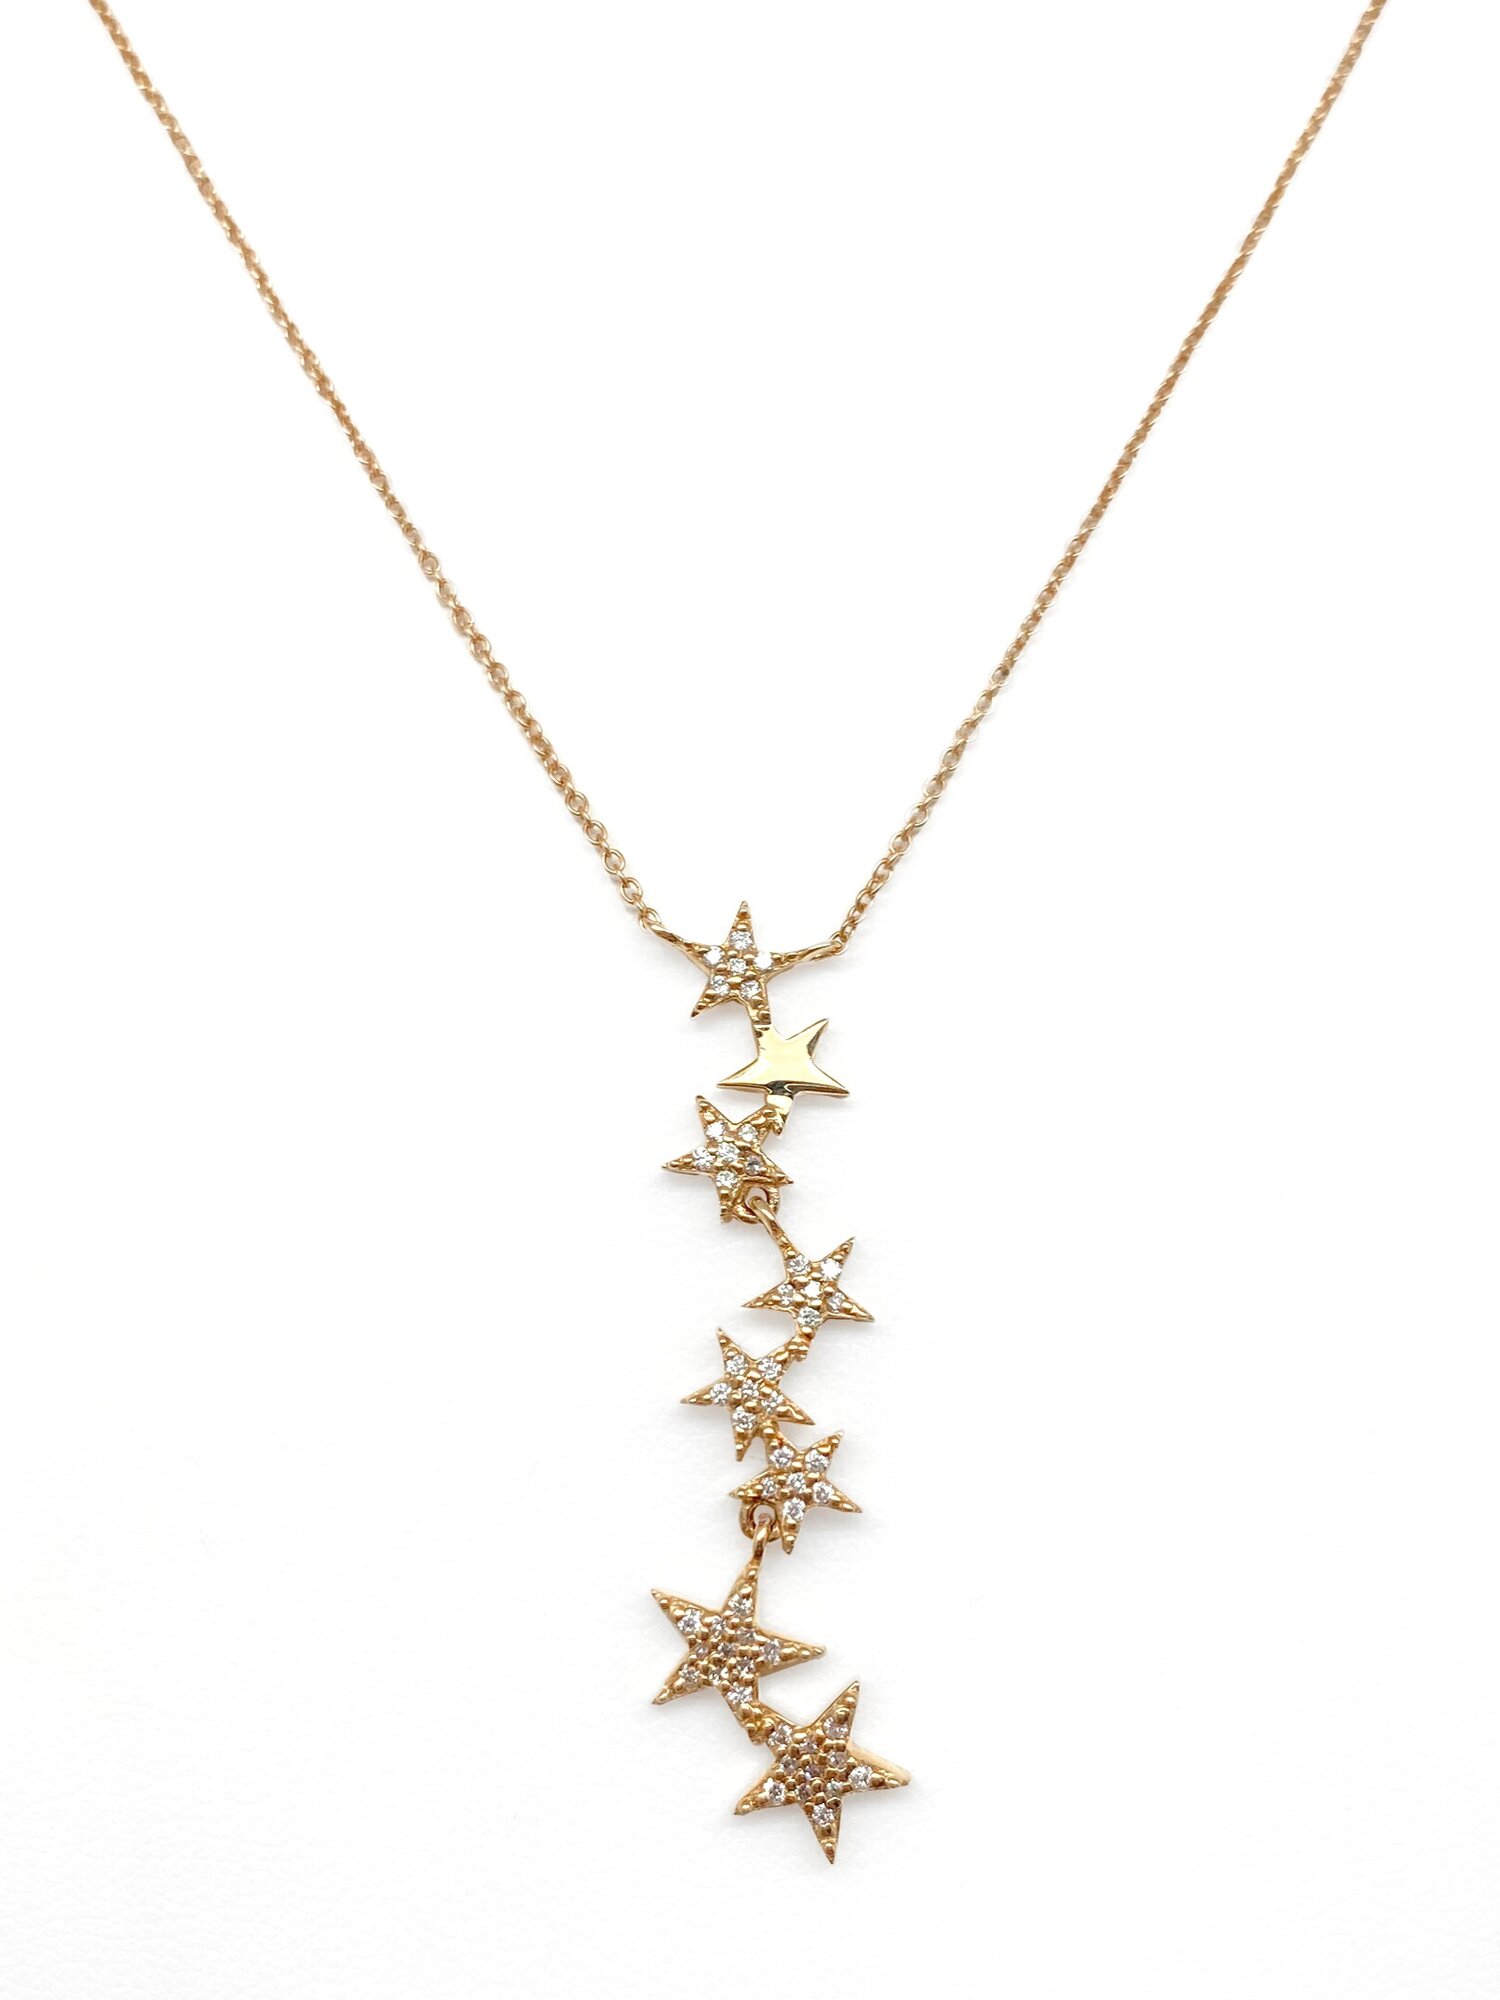 Antique Store's Drawer - Star Drop Necklace, 1932 White gold and